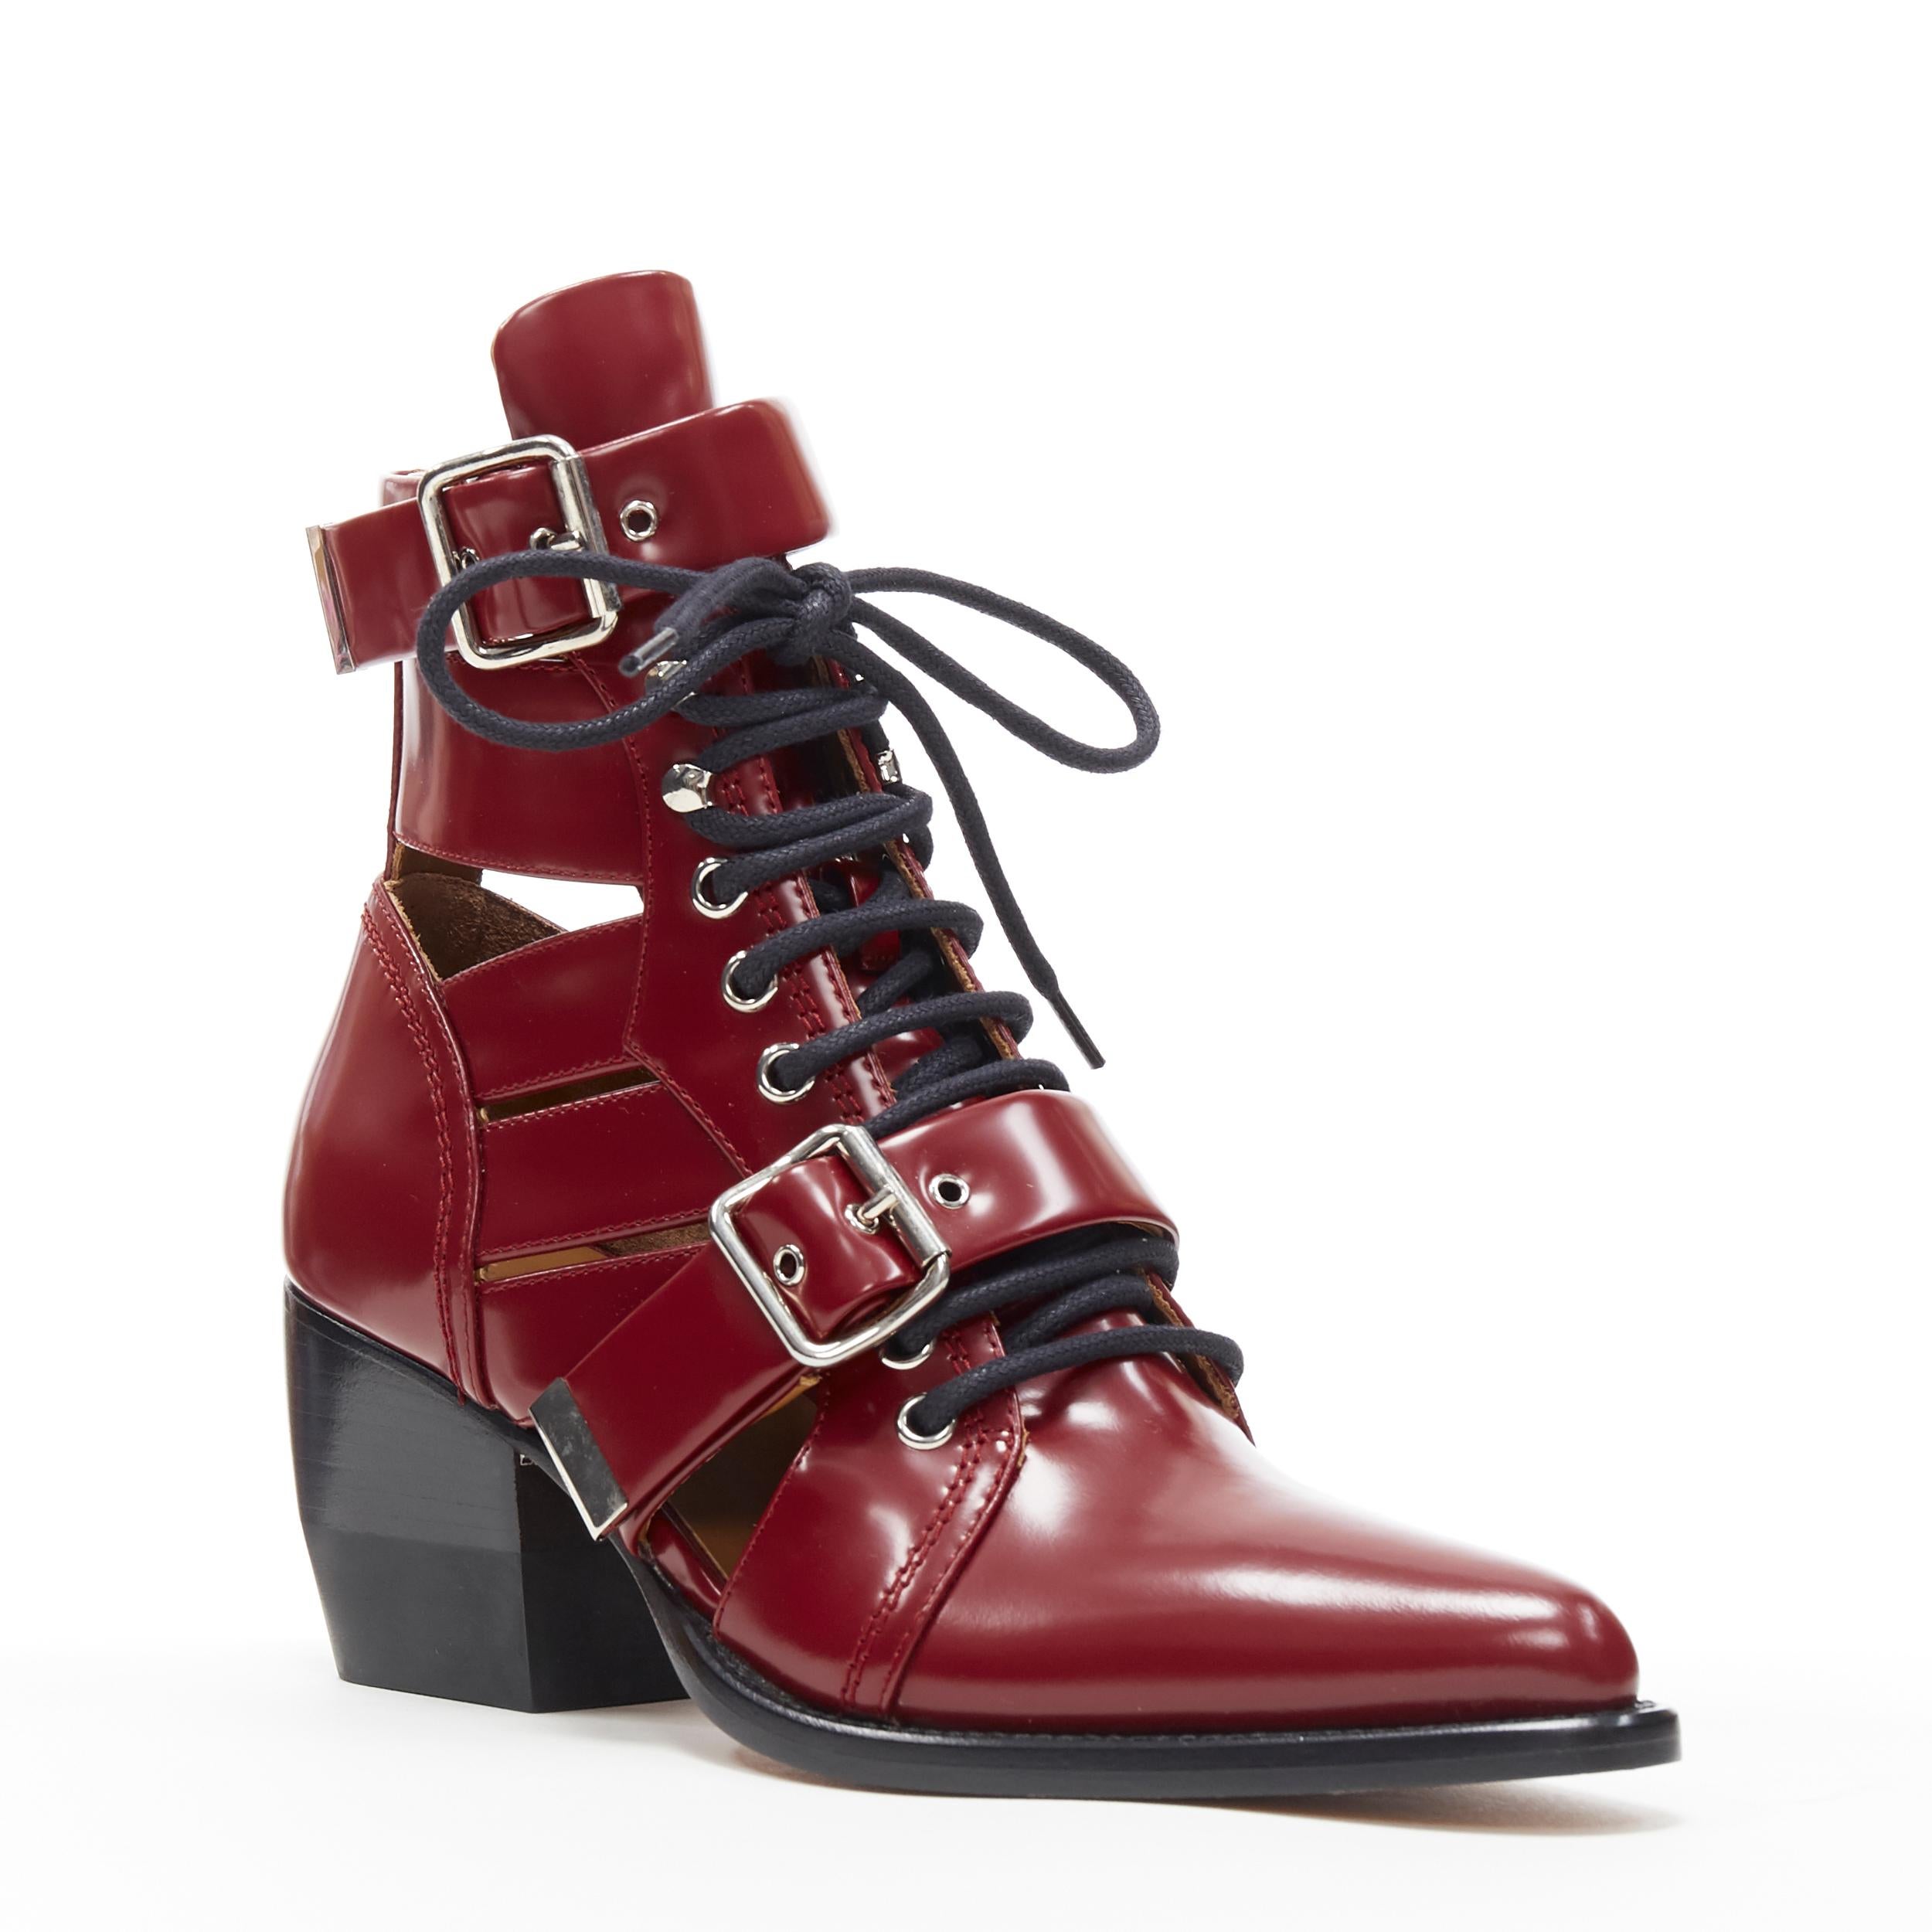 new CHLOE Rylee burgundy red leather cut out buckled pointy ankle boot EU40.5
Brand: Chloe
Model Name / Style: Rylee
Material: Leather
Color: Burgundy
Pattern: Solid
Closure: Lace up
Extra Detail: Signature Rylee boots by Chloe. Runway style. Ankle